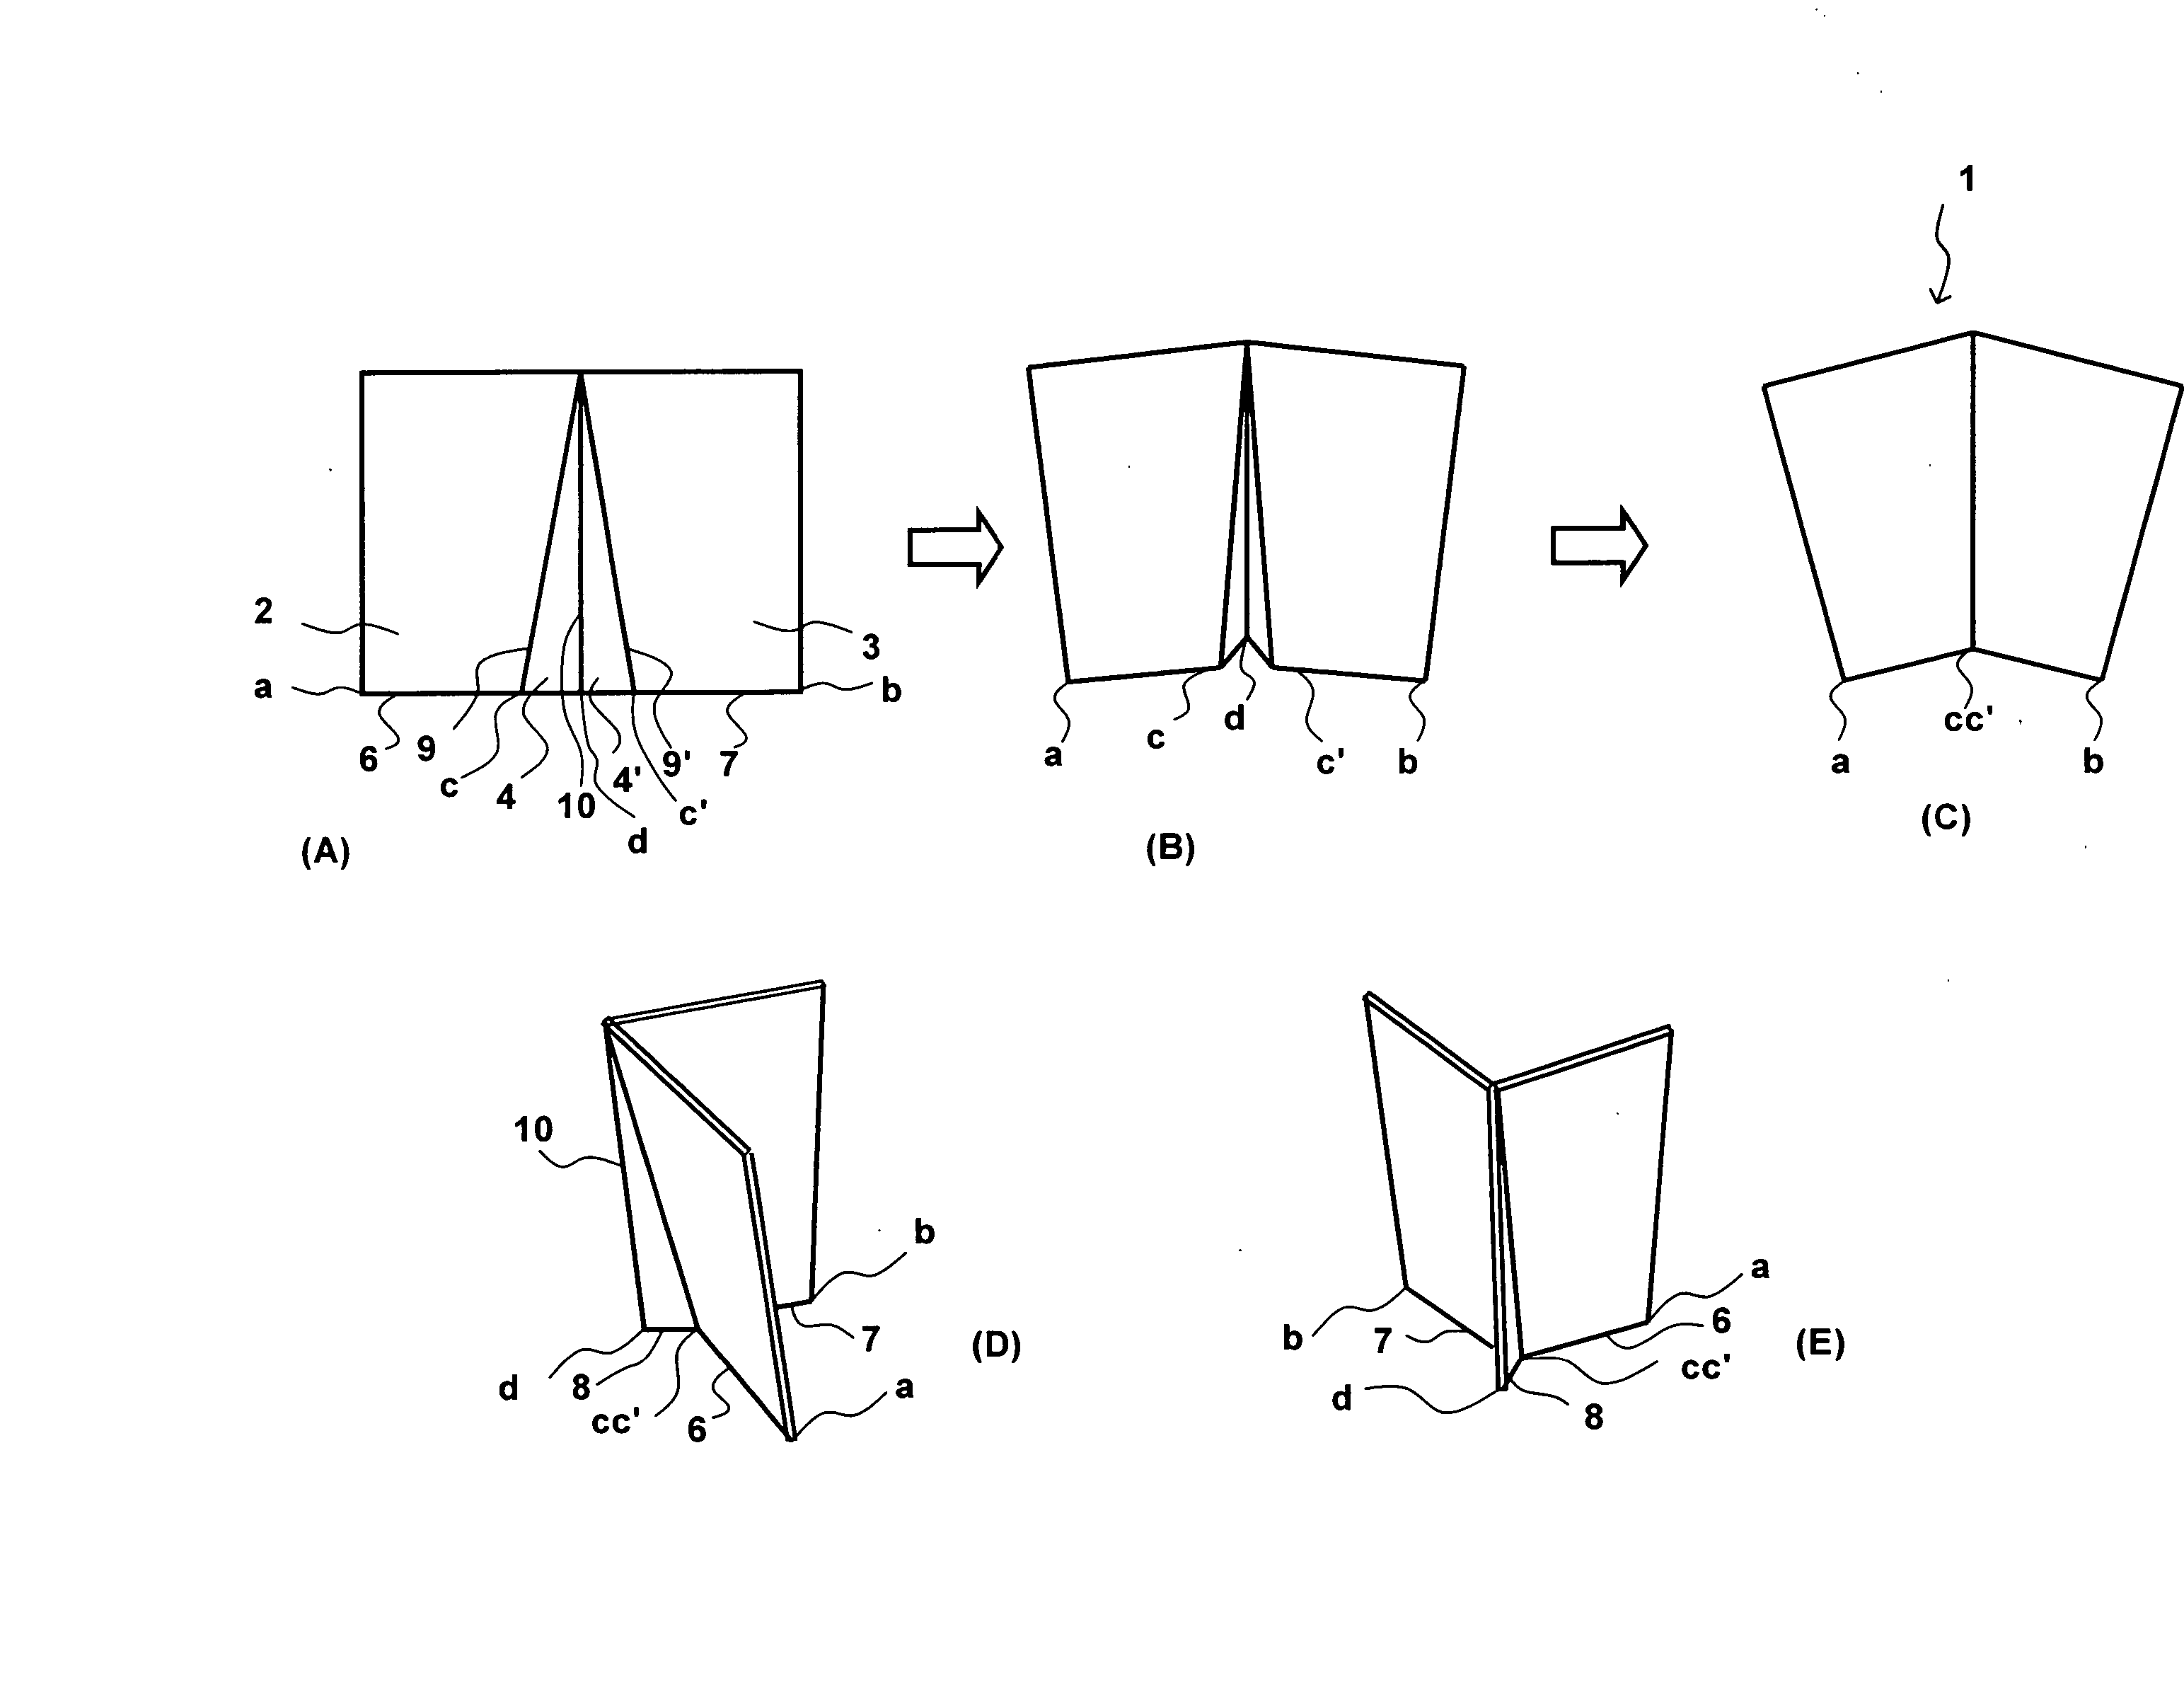 Self-Standing Flat Plate-Like Article and Methods of Exhibiting and Manufacturing the Same